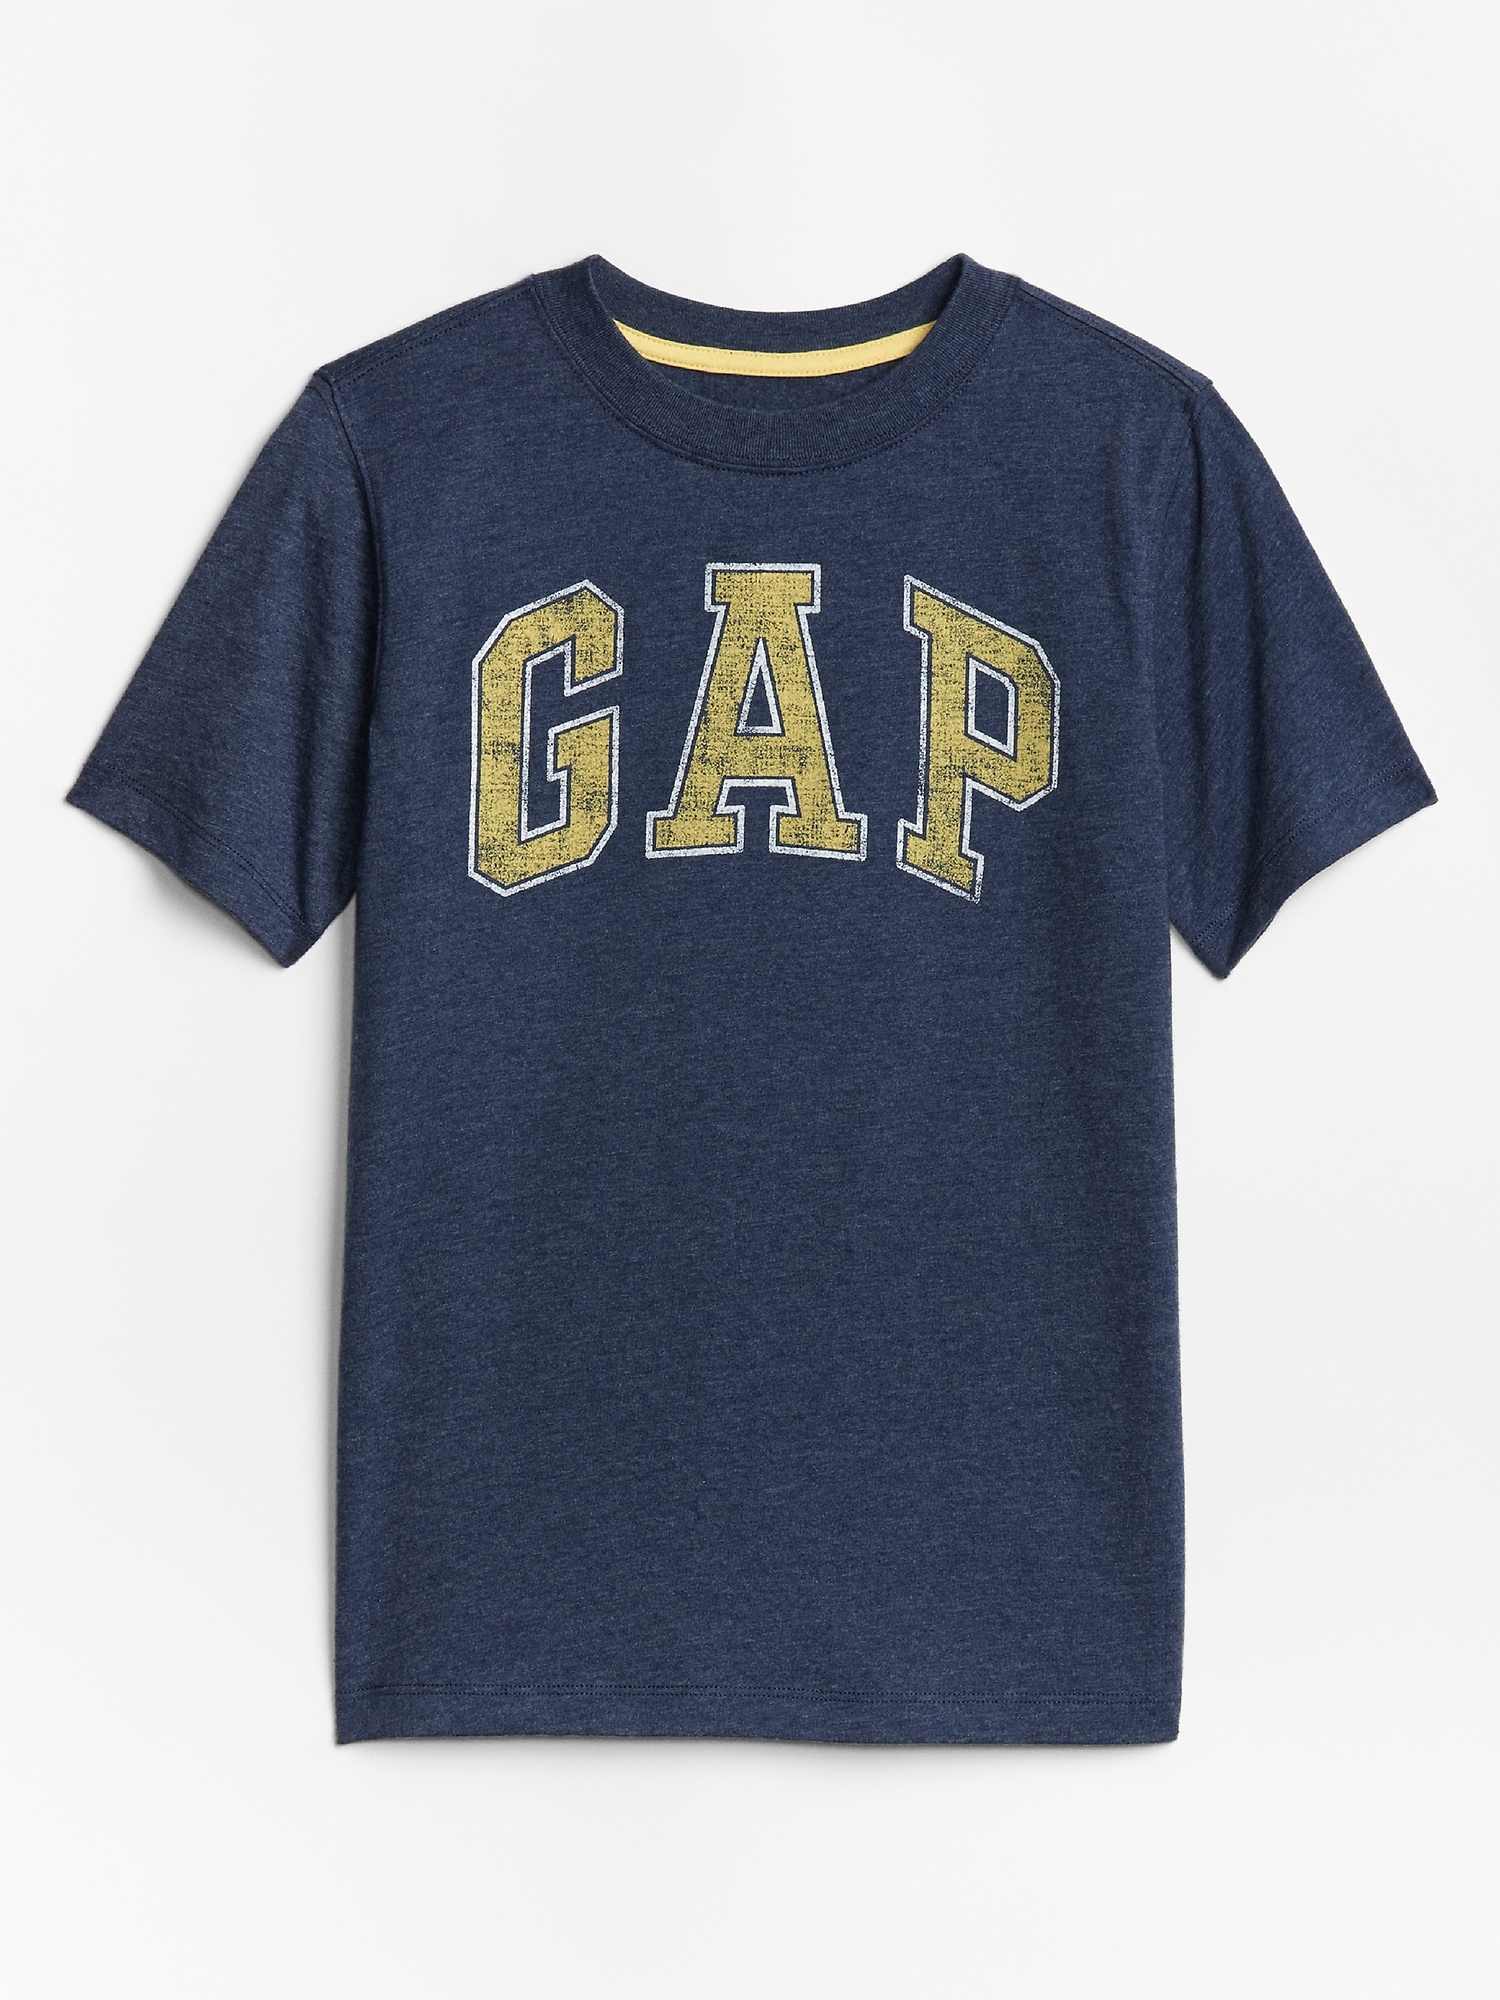 frost By law Contraction Kids Gap Logo T-Shirt | Gap Factory